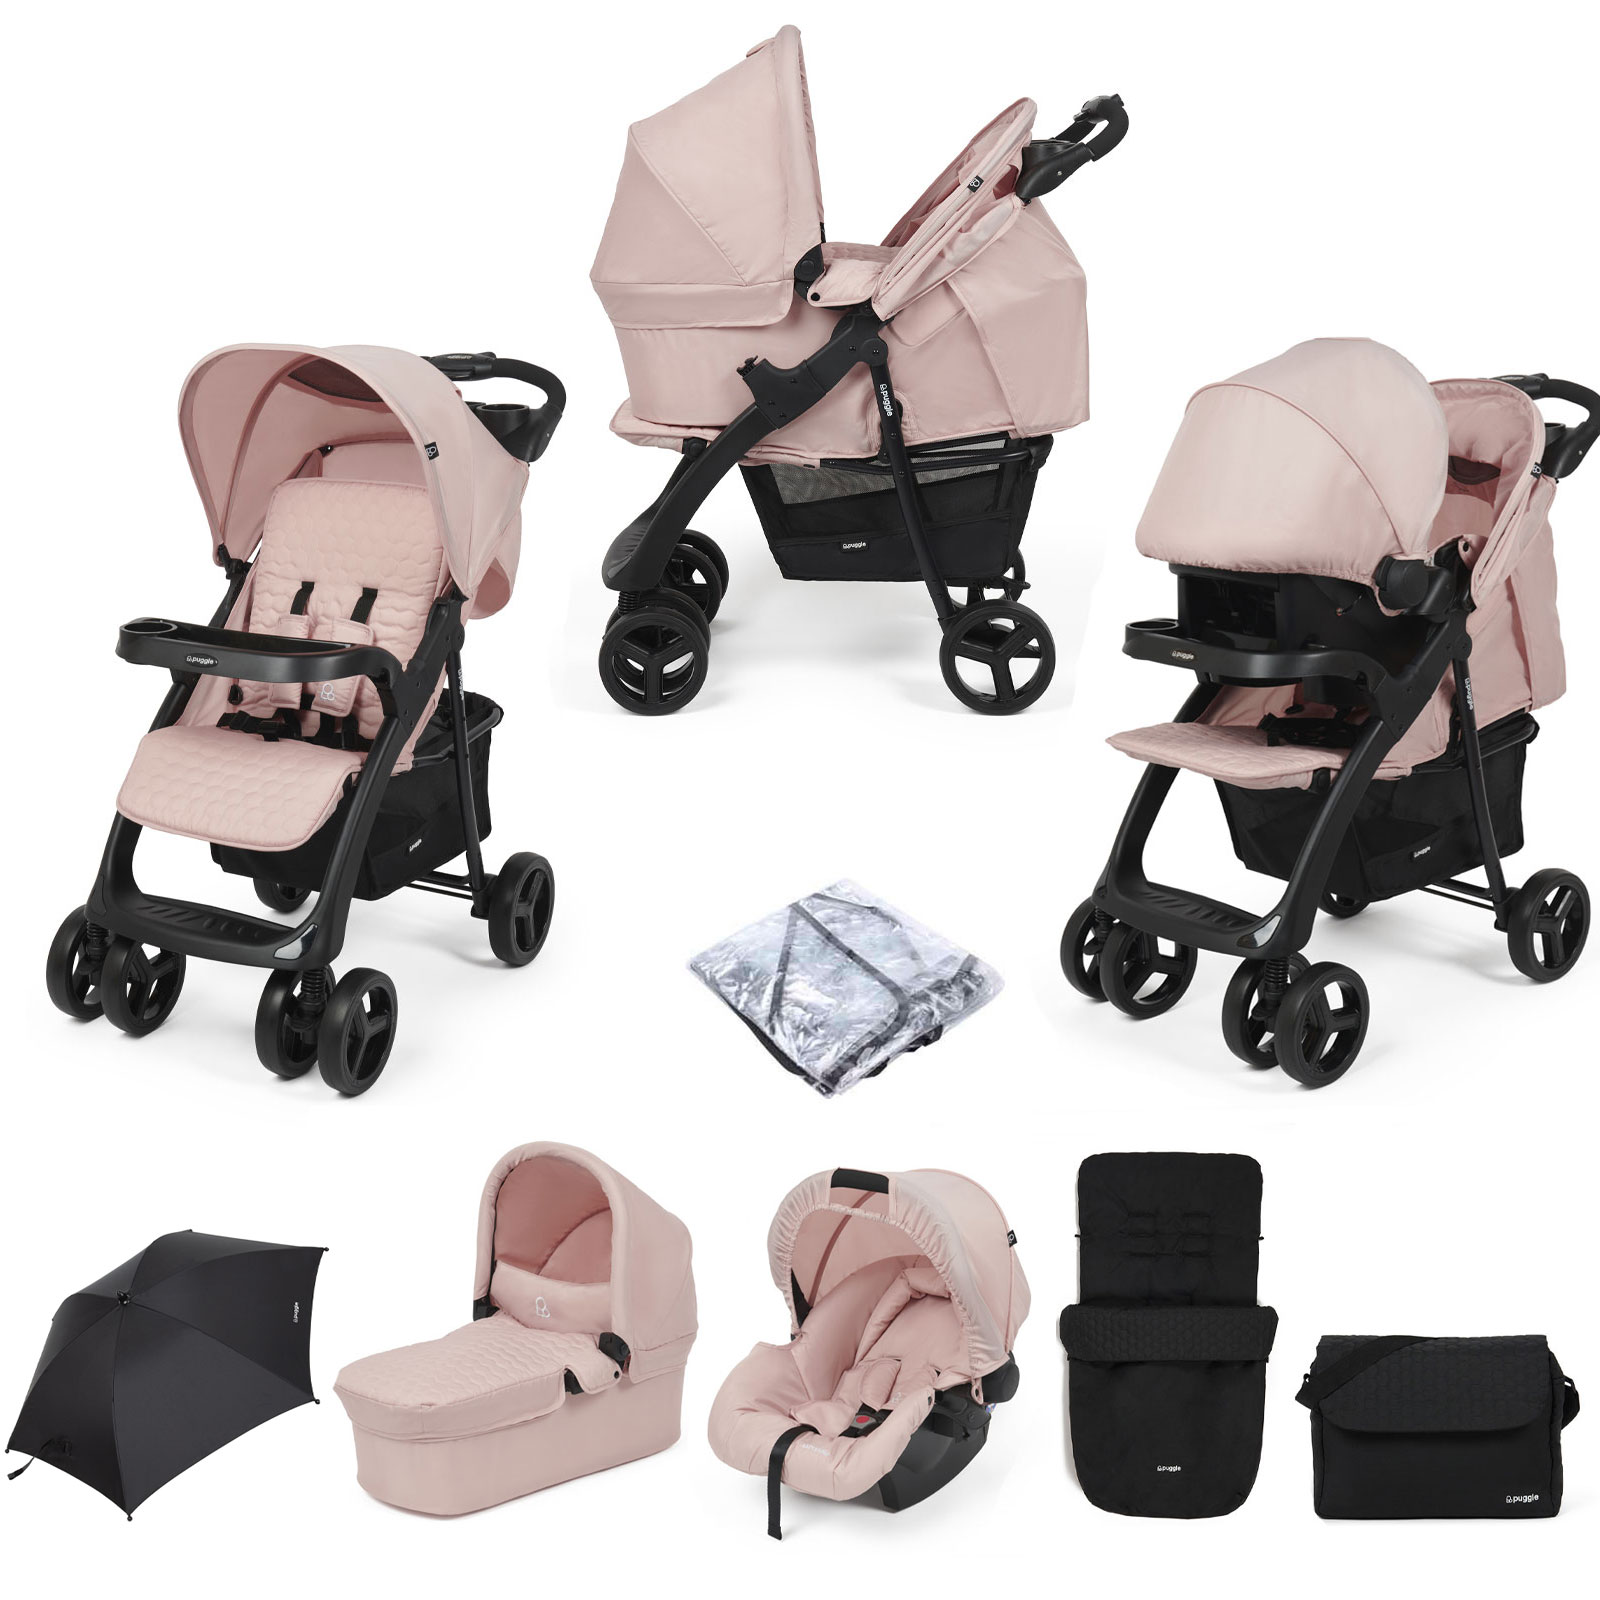 Puggle Denver Luxe 3in1 Travel System with Raincover, Footmuff, Parasol & Changing Bag - Blush Pink